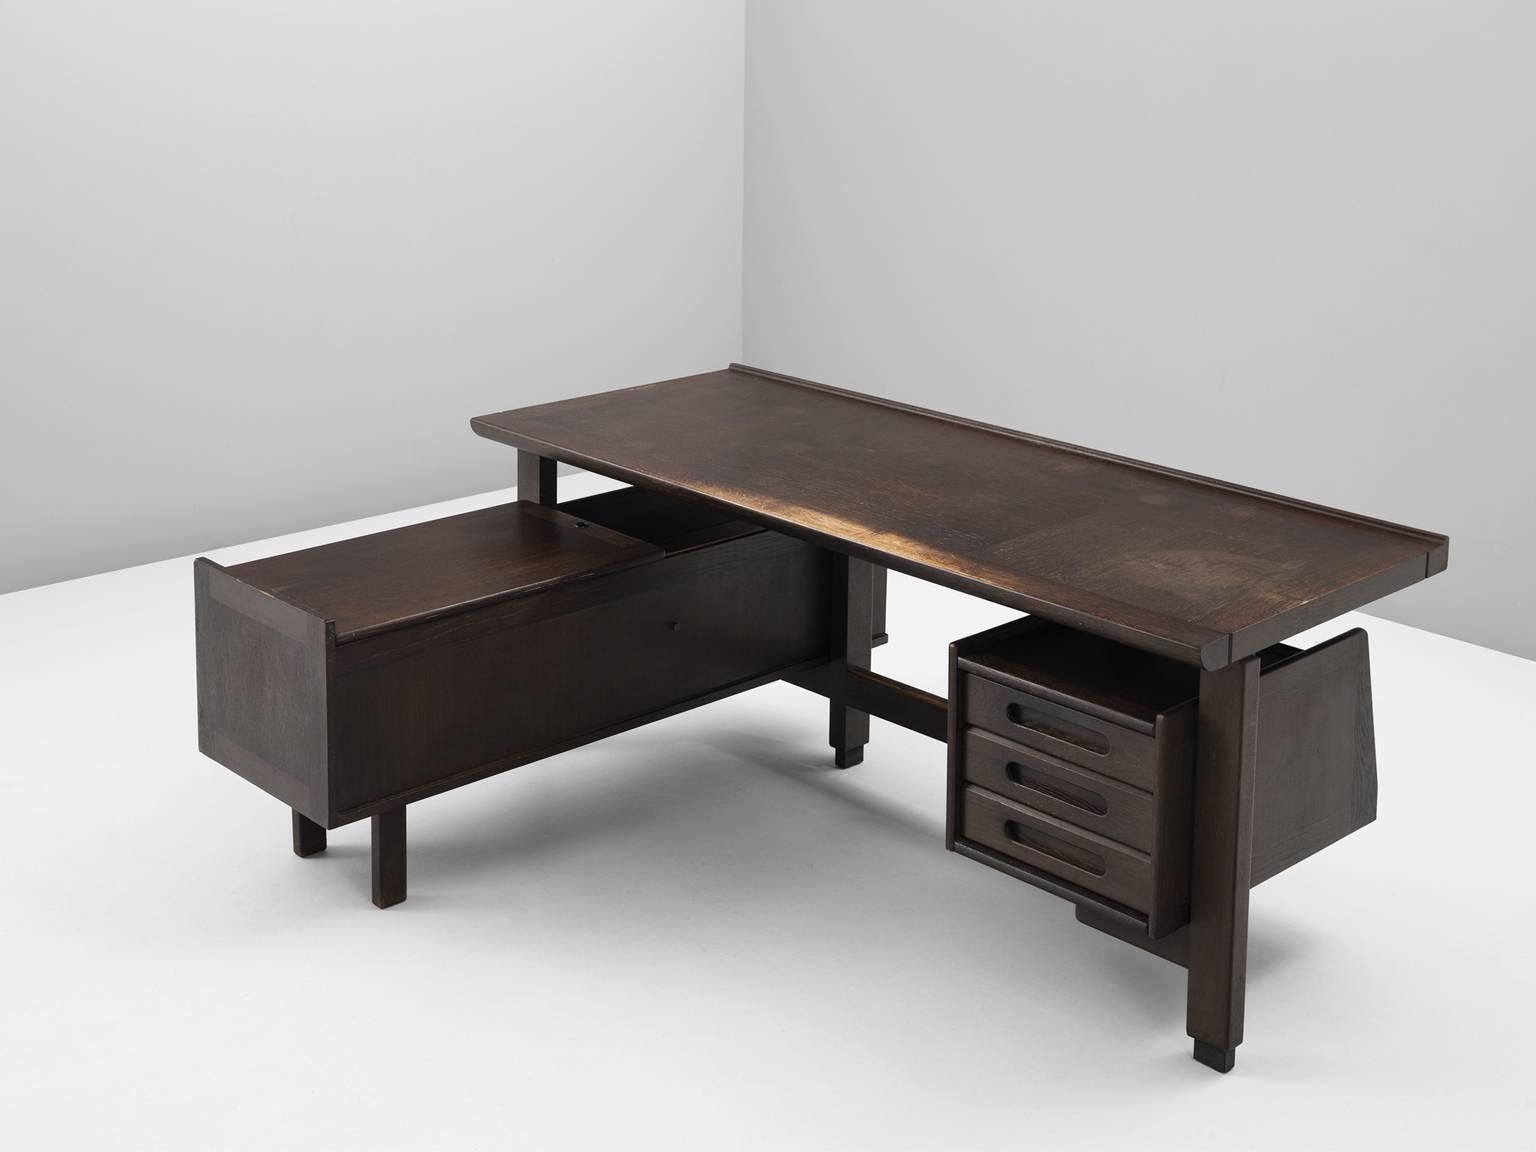 Corner desk in stained oak, by Guillerme et Chambron, France, 1960s. 

Corner desk by French designer duo Guillerme and Chambron. This executive desk shows the fine craftsmanship and line work that characterizes the work of this designer duo. The